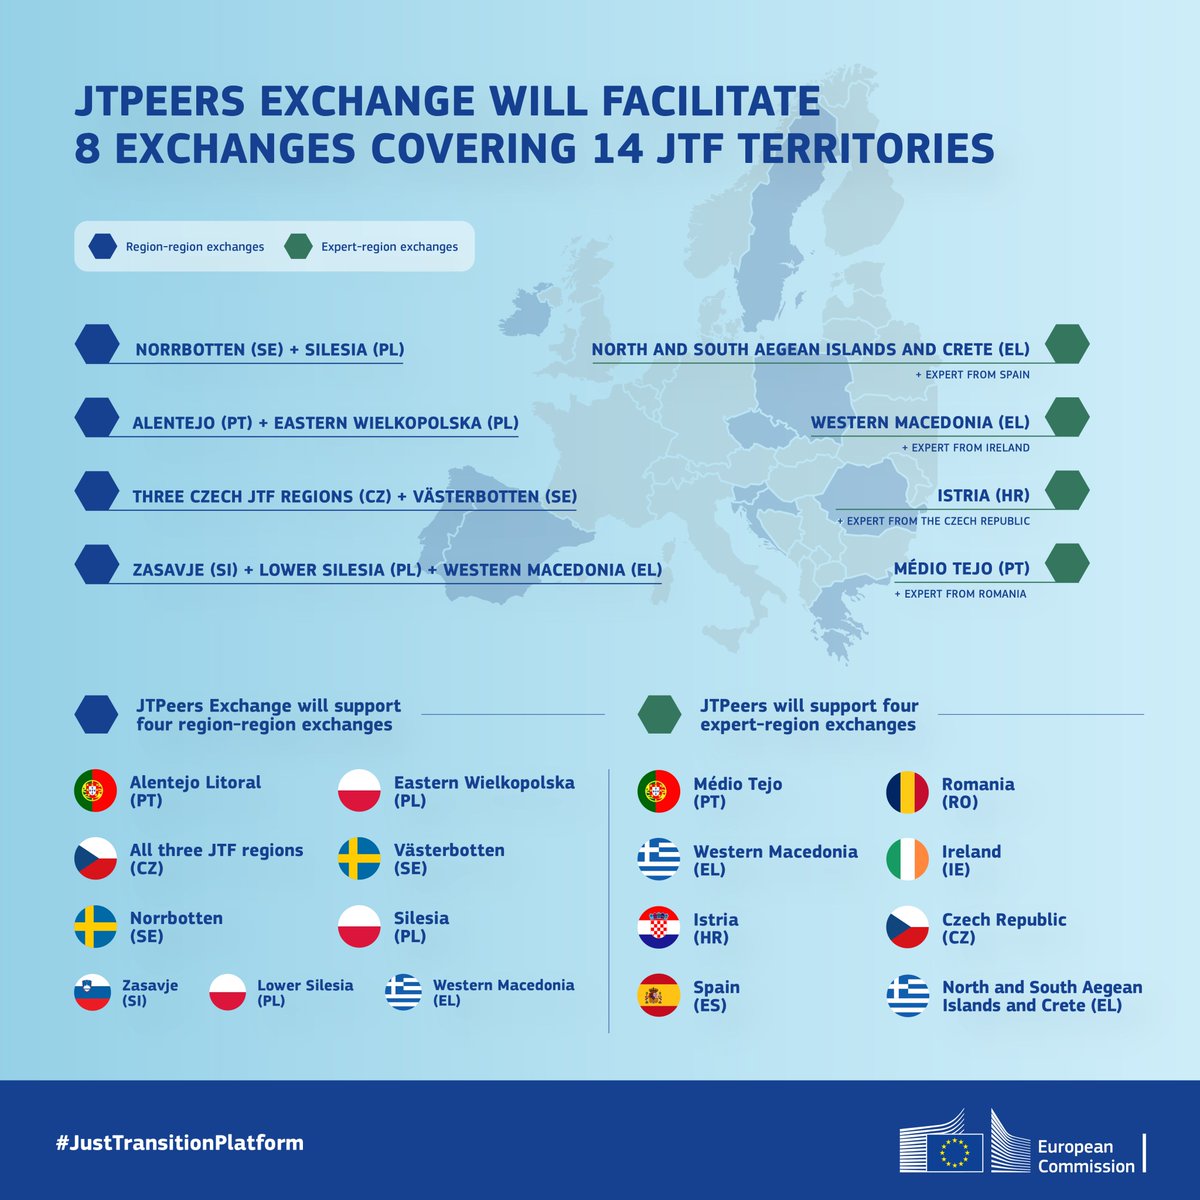 📢The #JustTransitionPlatform is proud to announce the second edition of peer-to-peer exchanges under the JTPeers Exchange program, covering 14 🇪🇺 territories & topics such as: ✅Sustainable energy ✅Community empowerment ✅Regional cooperation more here ➡europa.eu/!xvYpVP